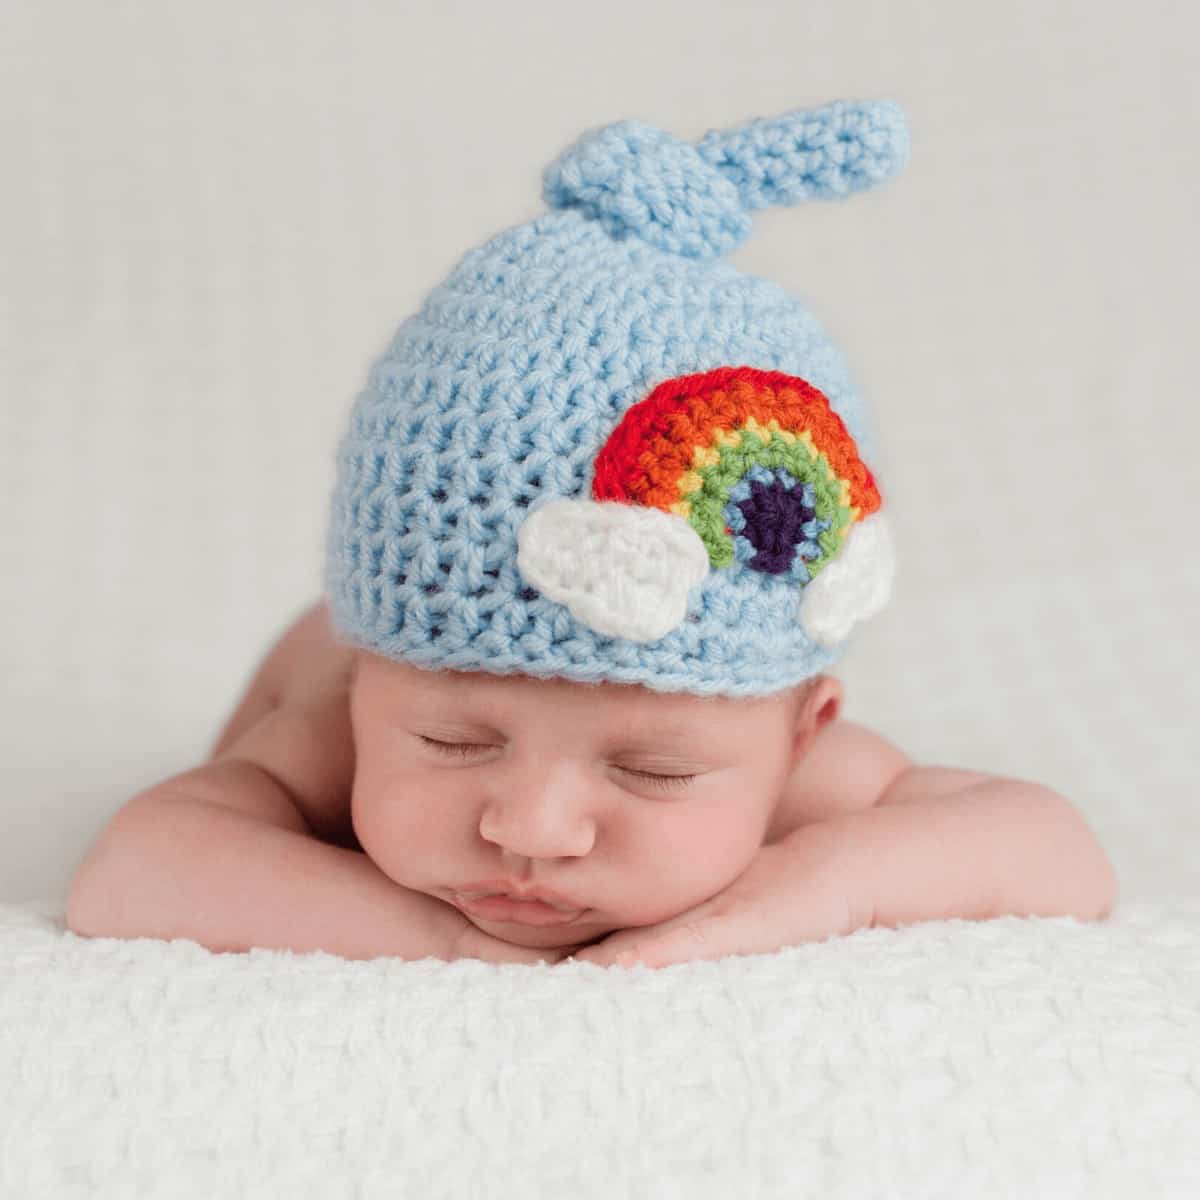 Infant baby is wearing a crochet hat that includes a rainbow design